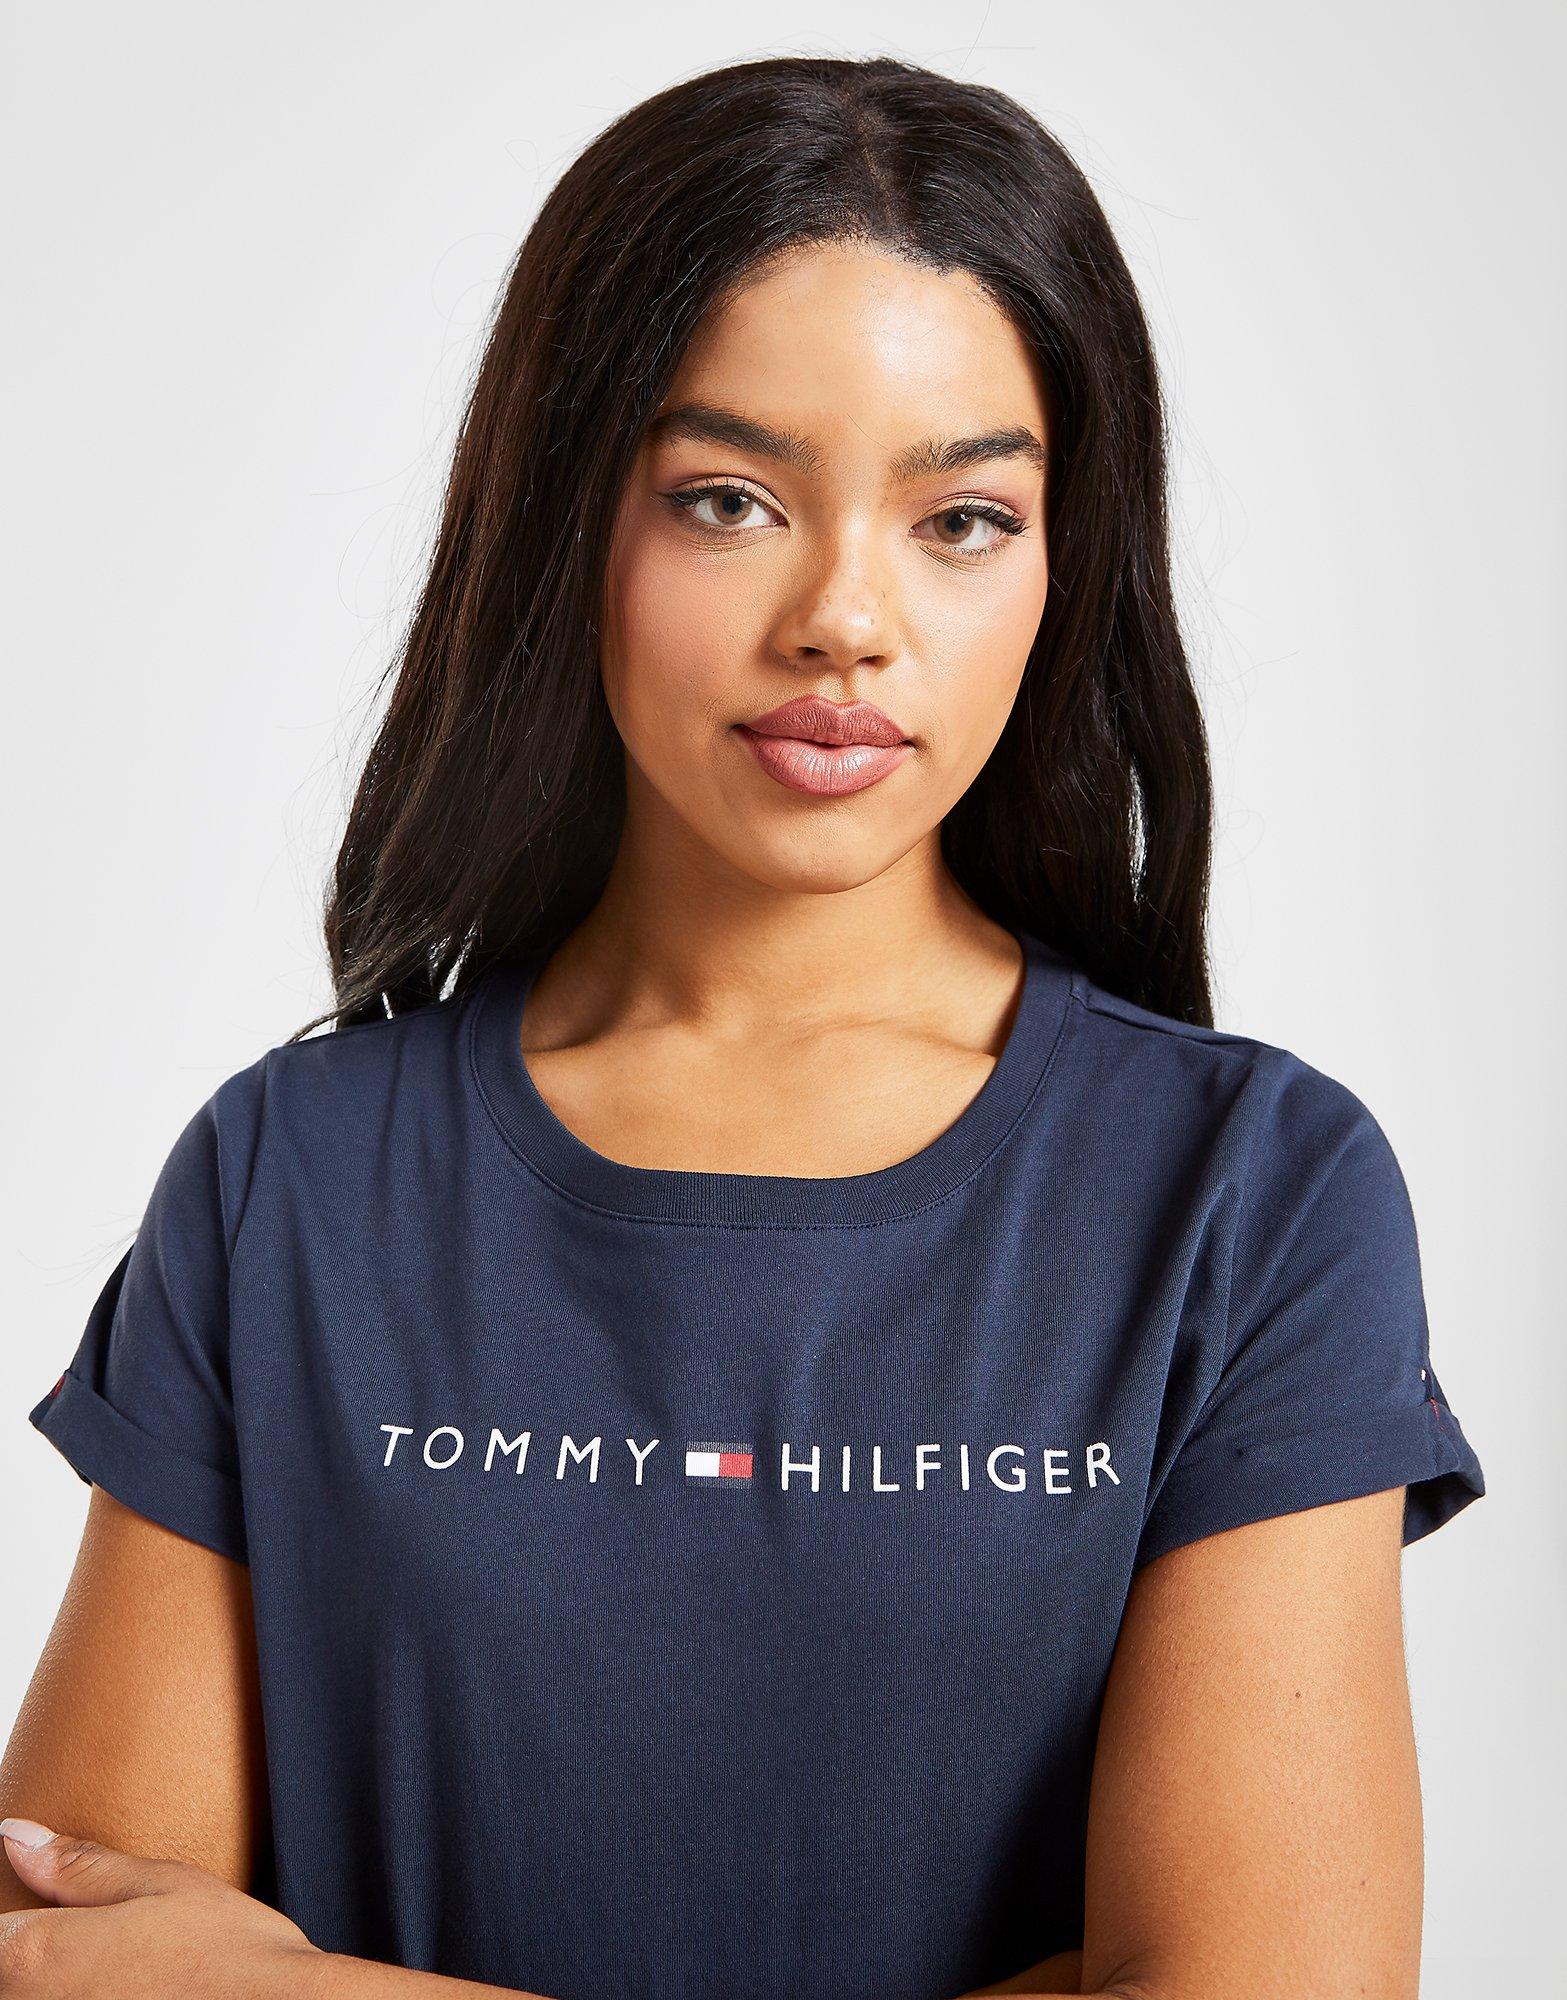 tommy hilfiger clothes womens